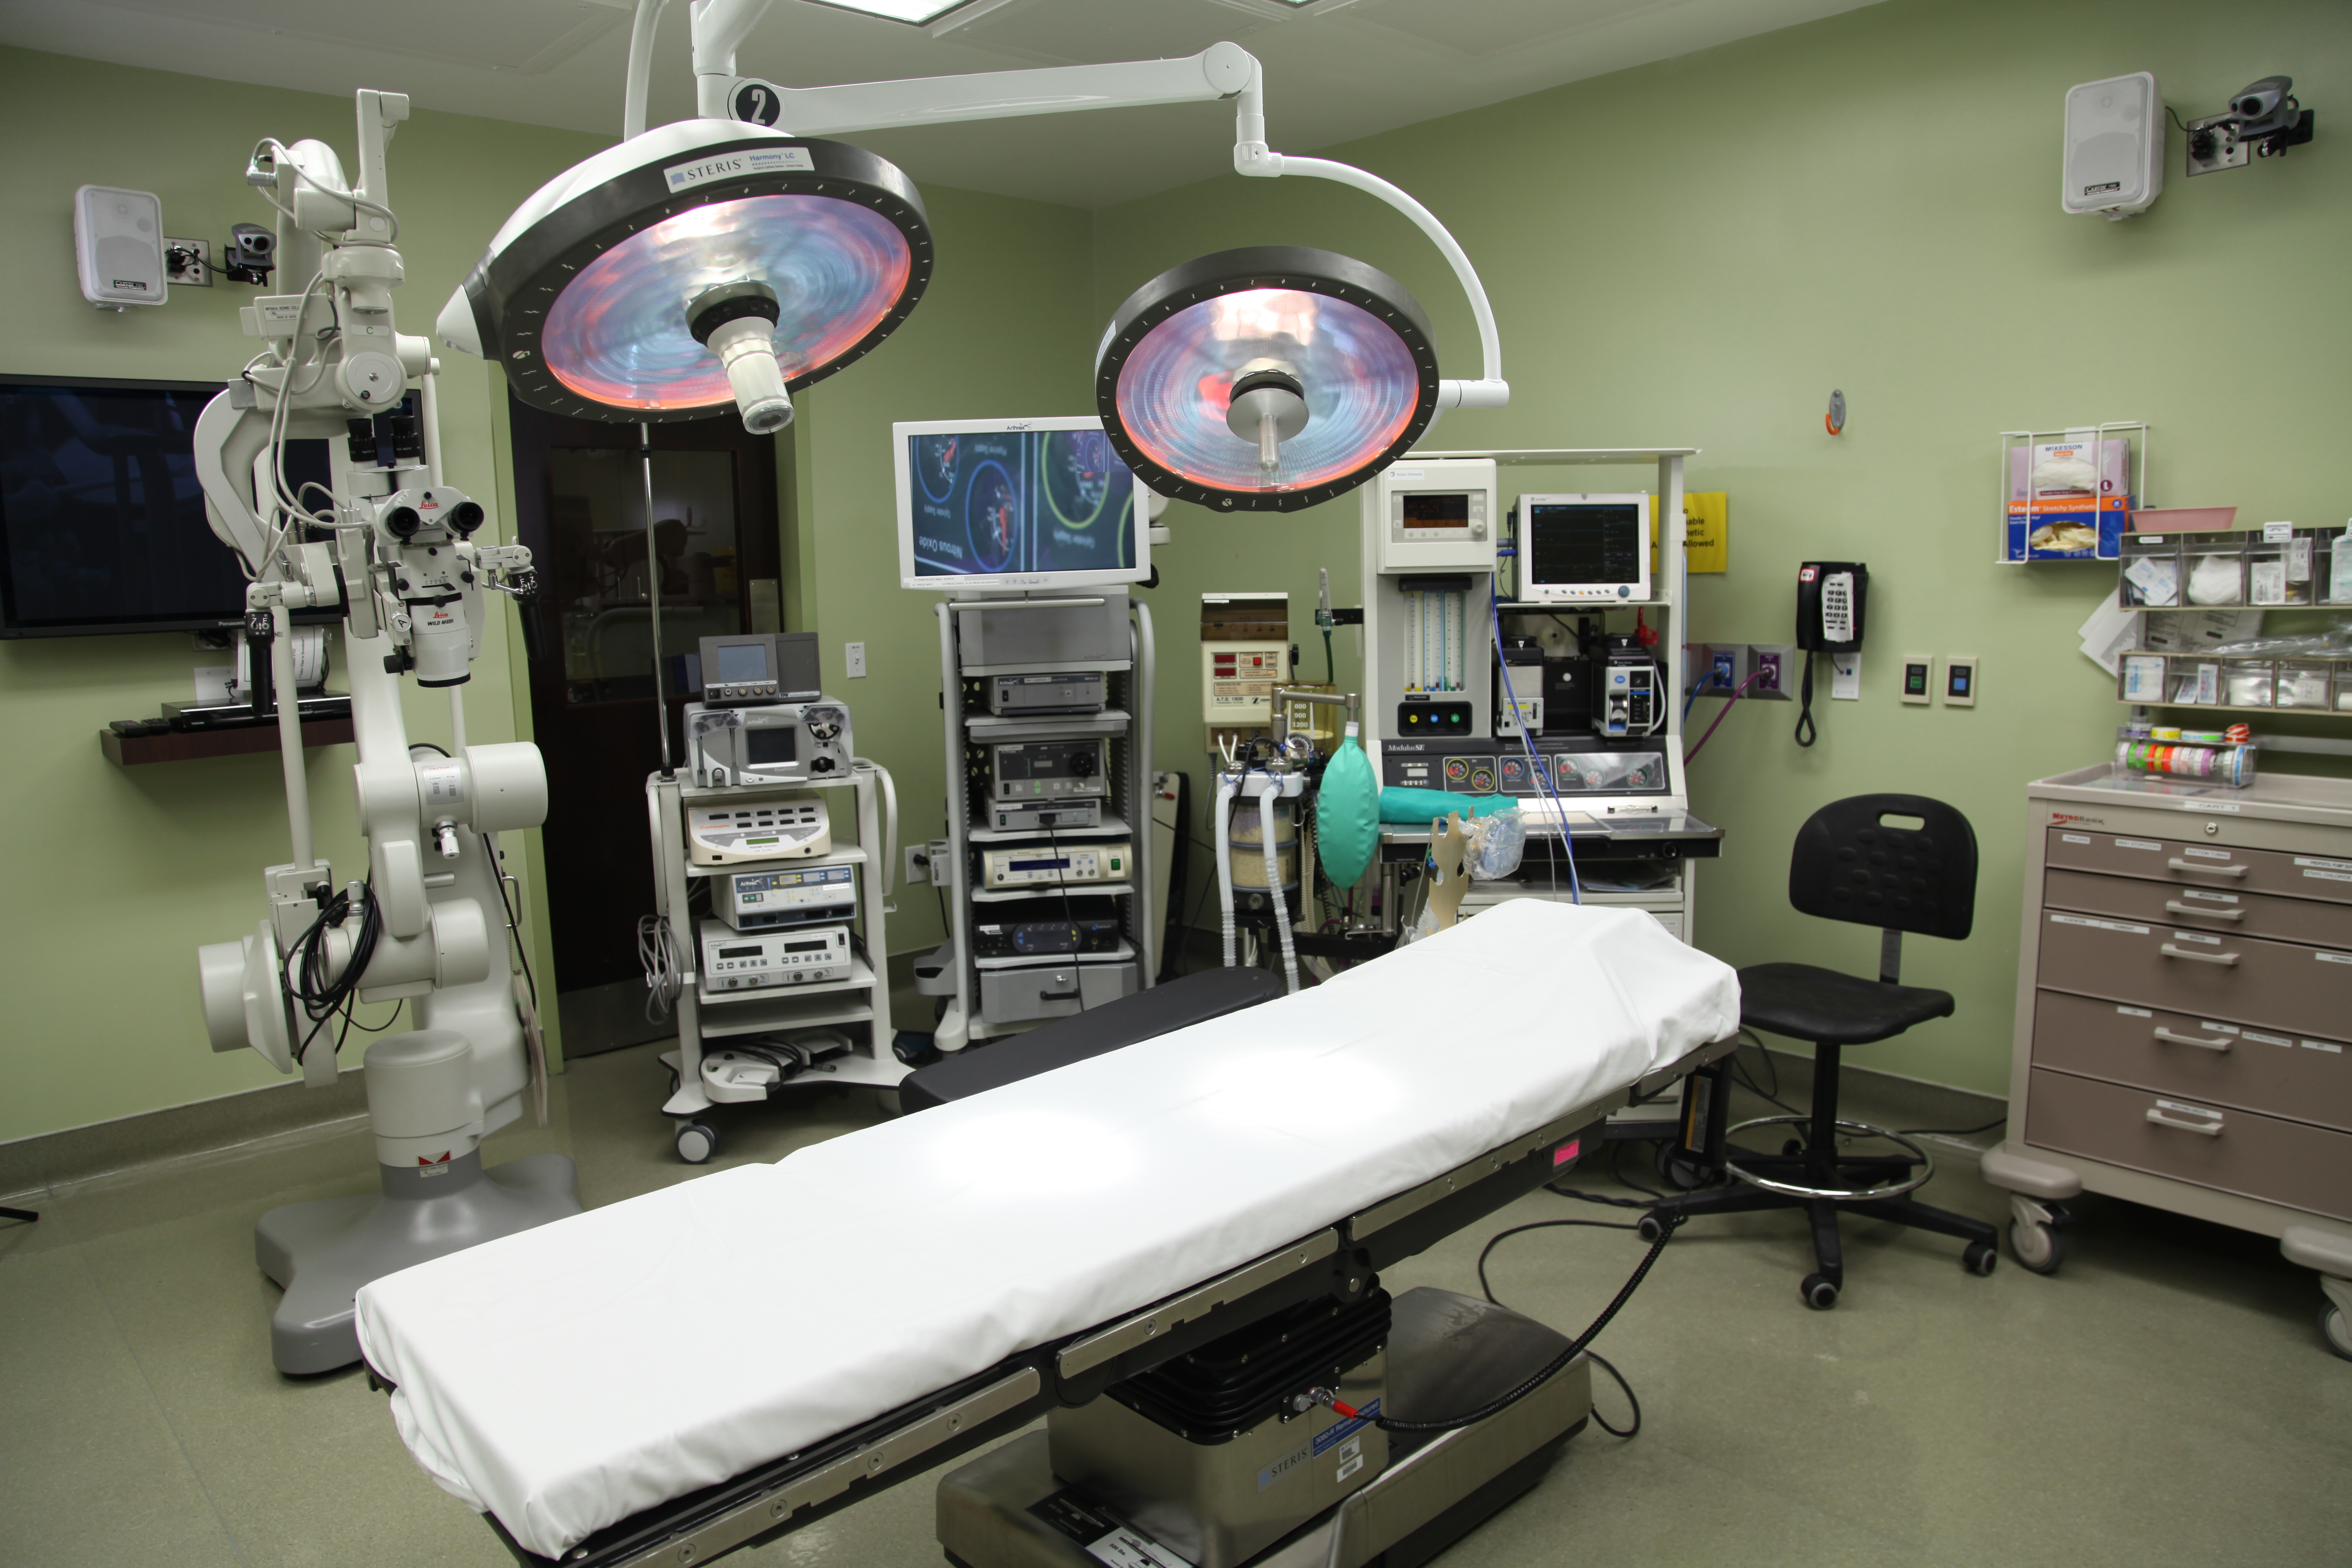 Surgical Center at Doral, Operating Room